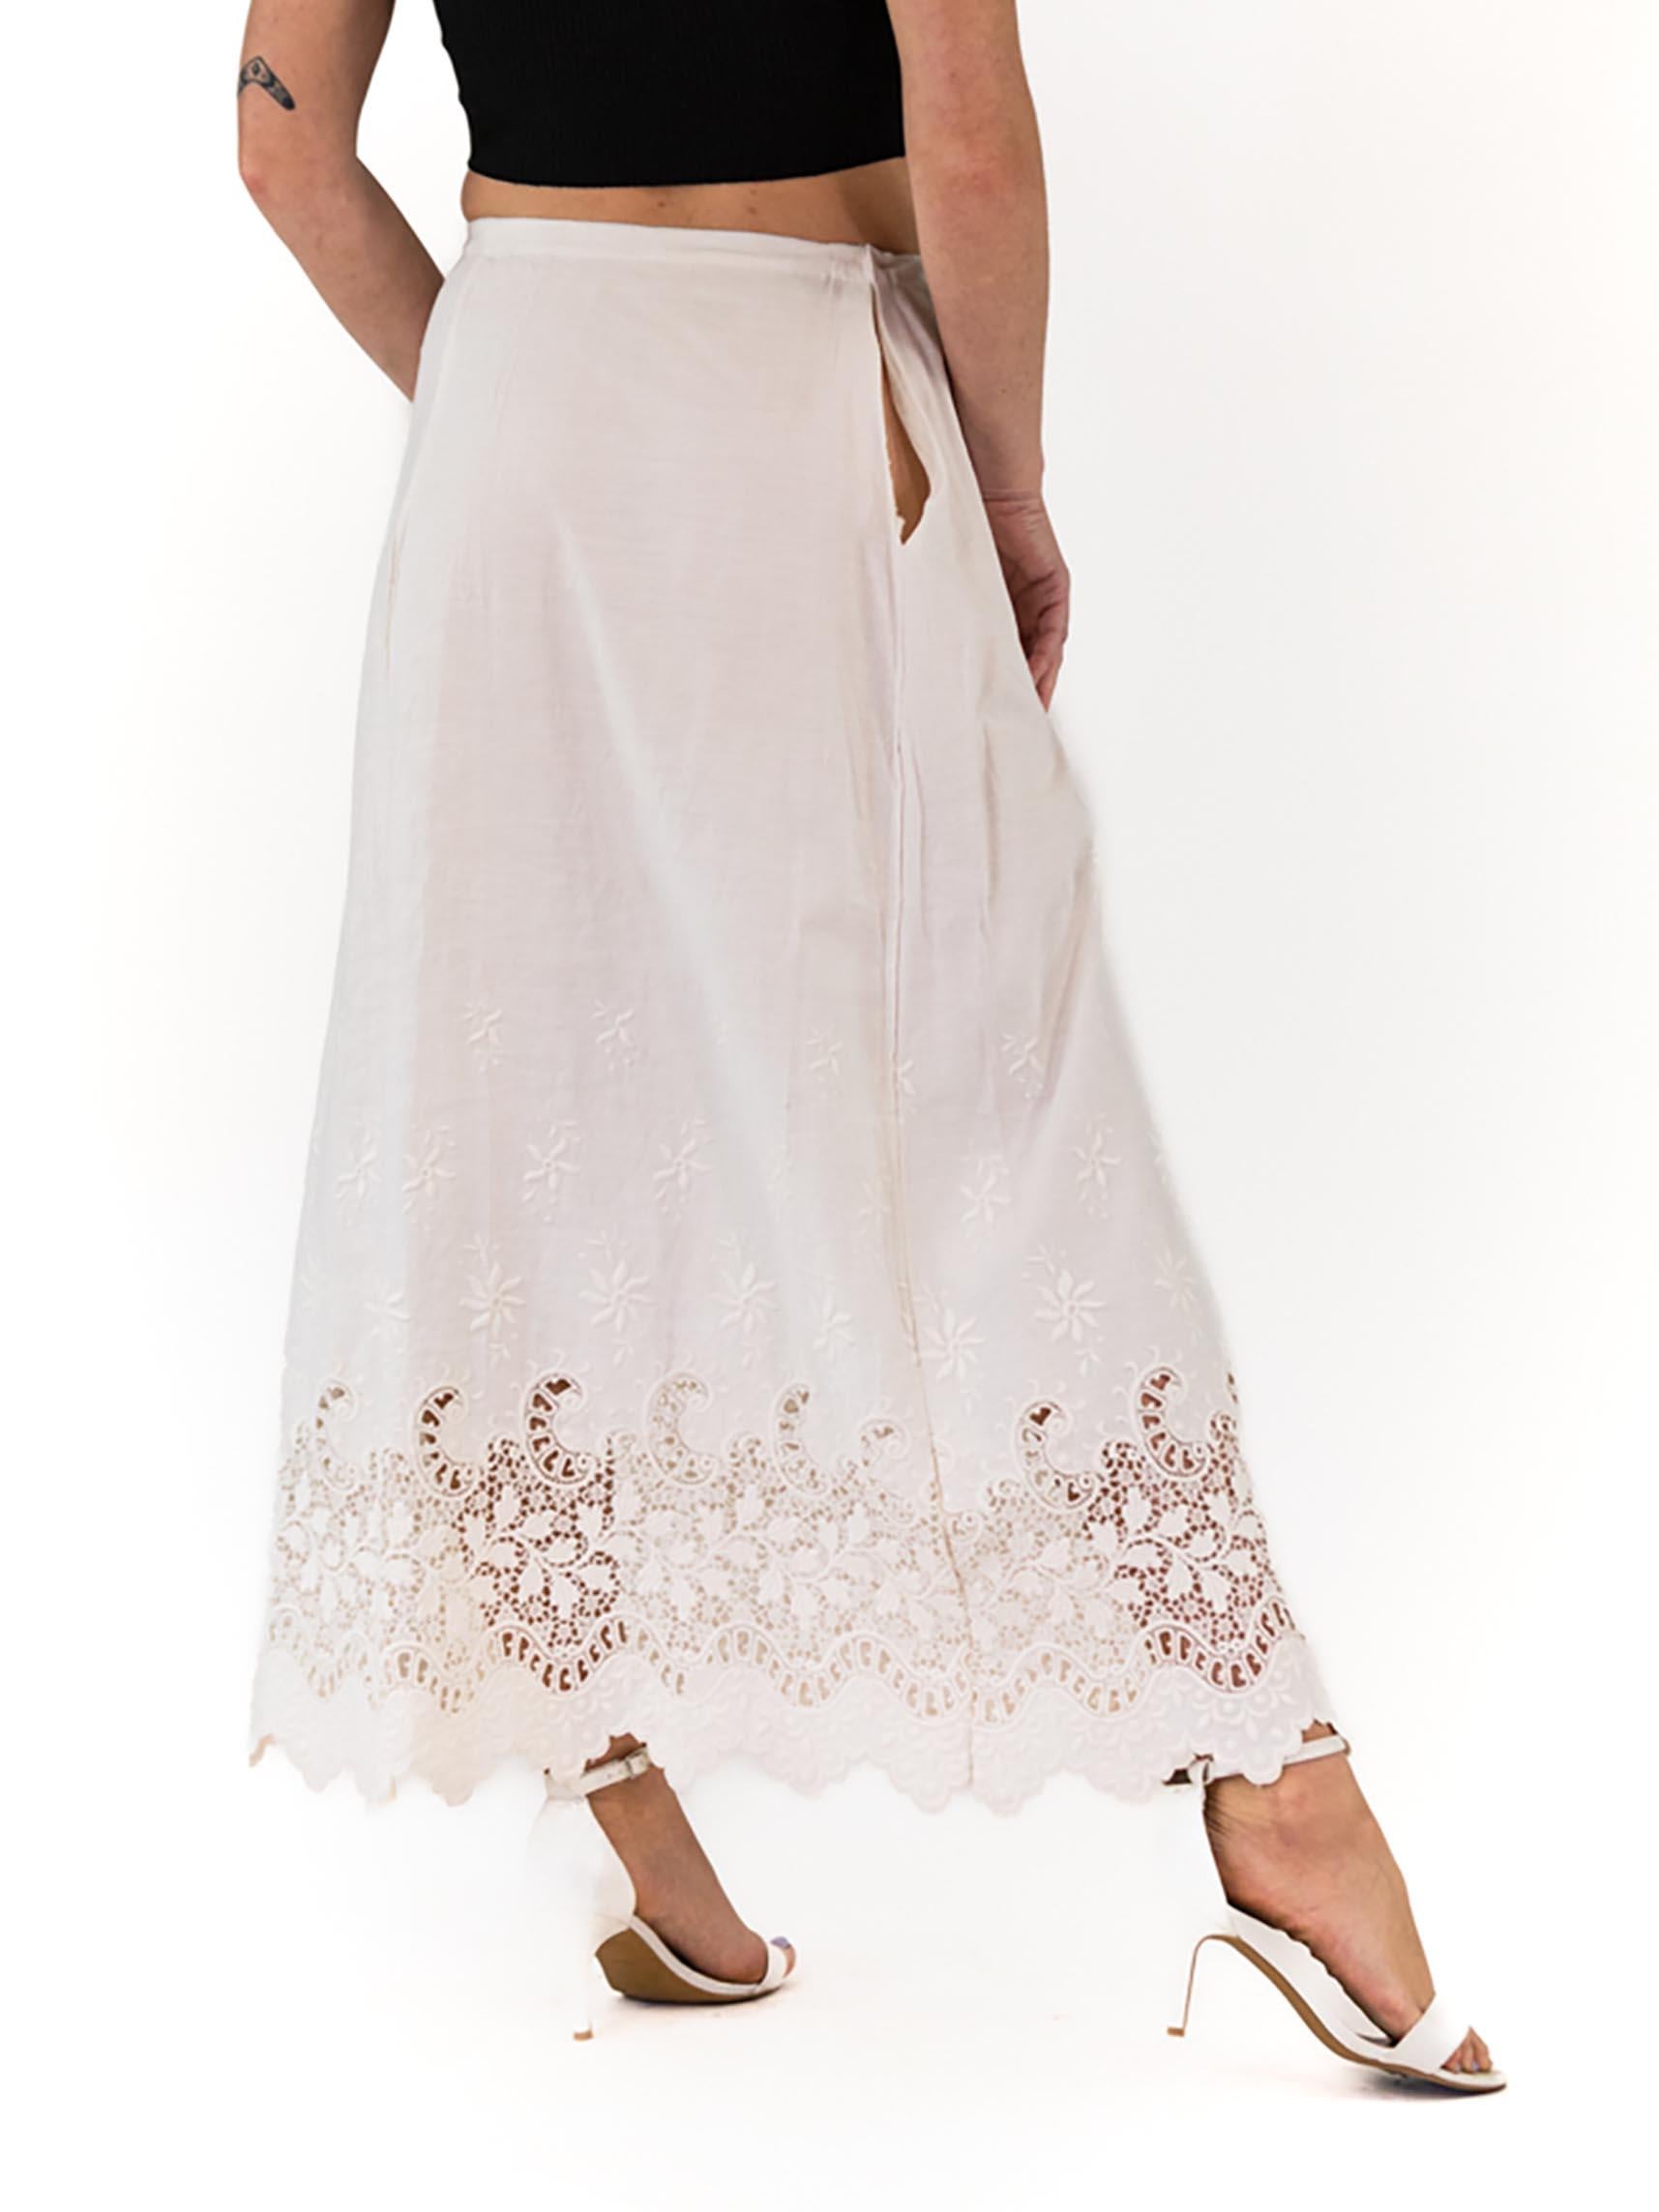 Edwardian White Linen Skirt With Floral Hand Embroidery 2